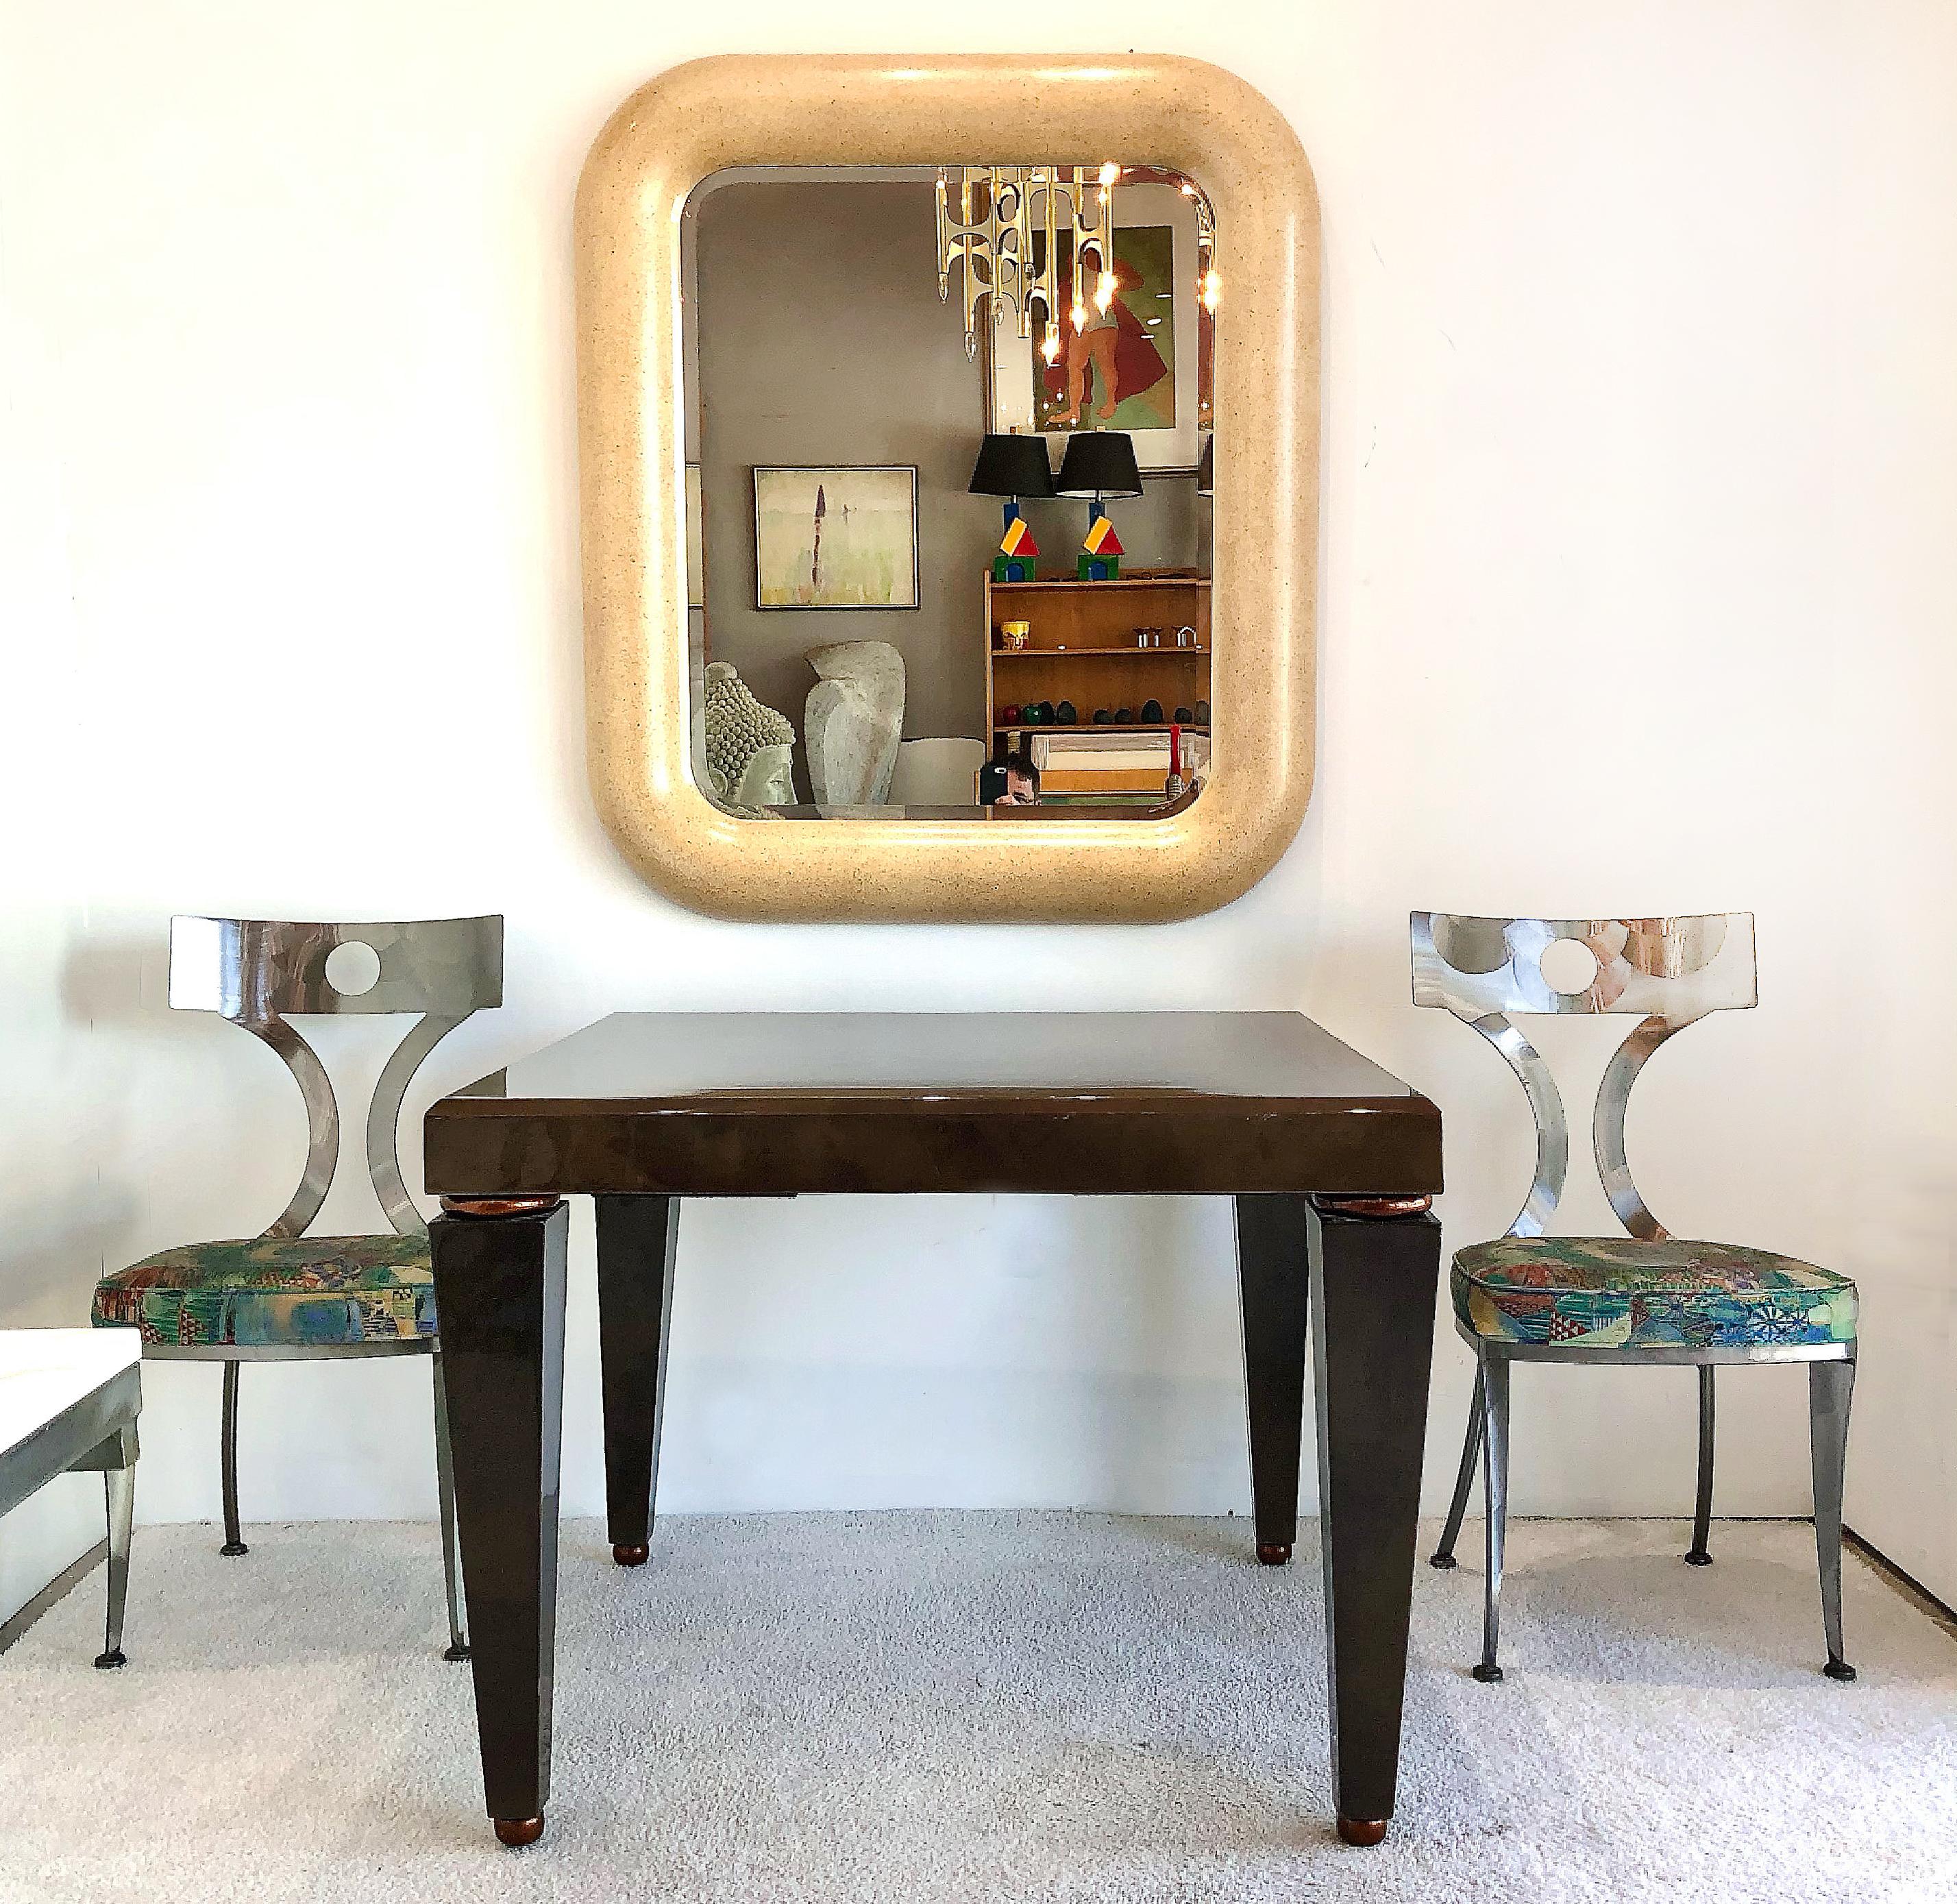 Enrique Garcel Springer style goatskin game table

Offered for sale is a 1980s Karl Springer style chocolate brown lacquered Goatskin Game Table The table is created in the Postmodern style with gilt-copper ring details on the stylized tapered legs